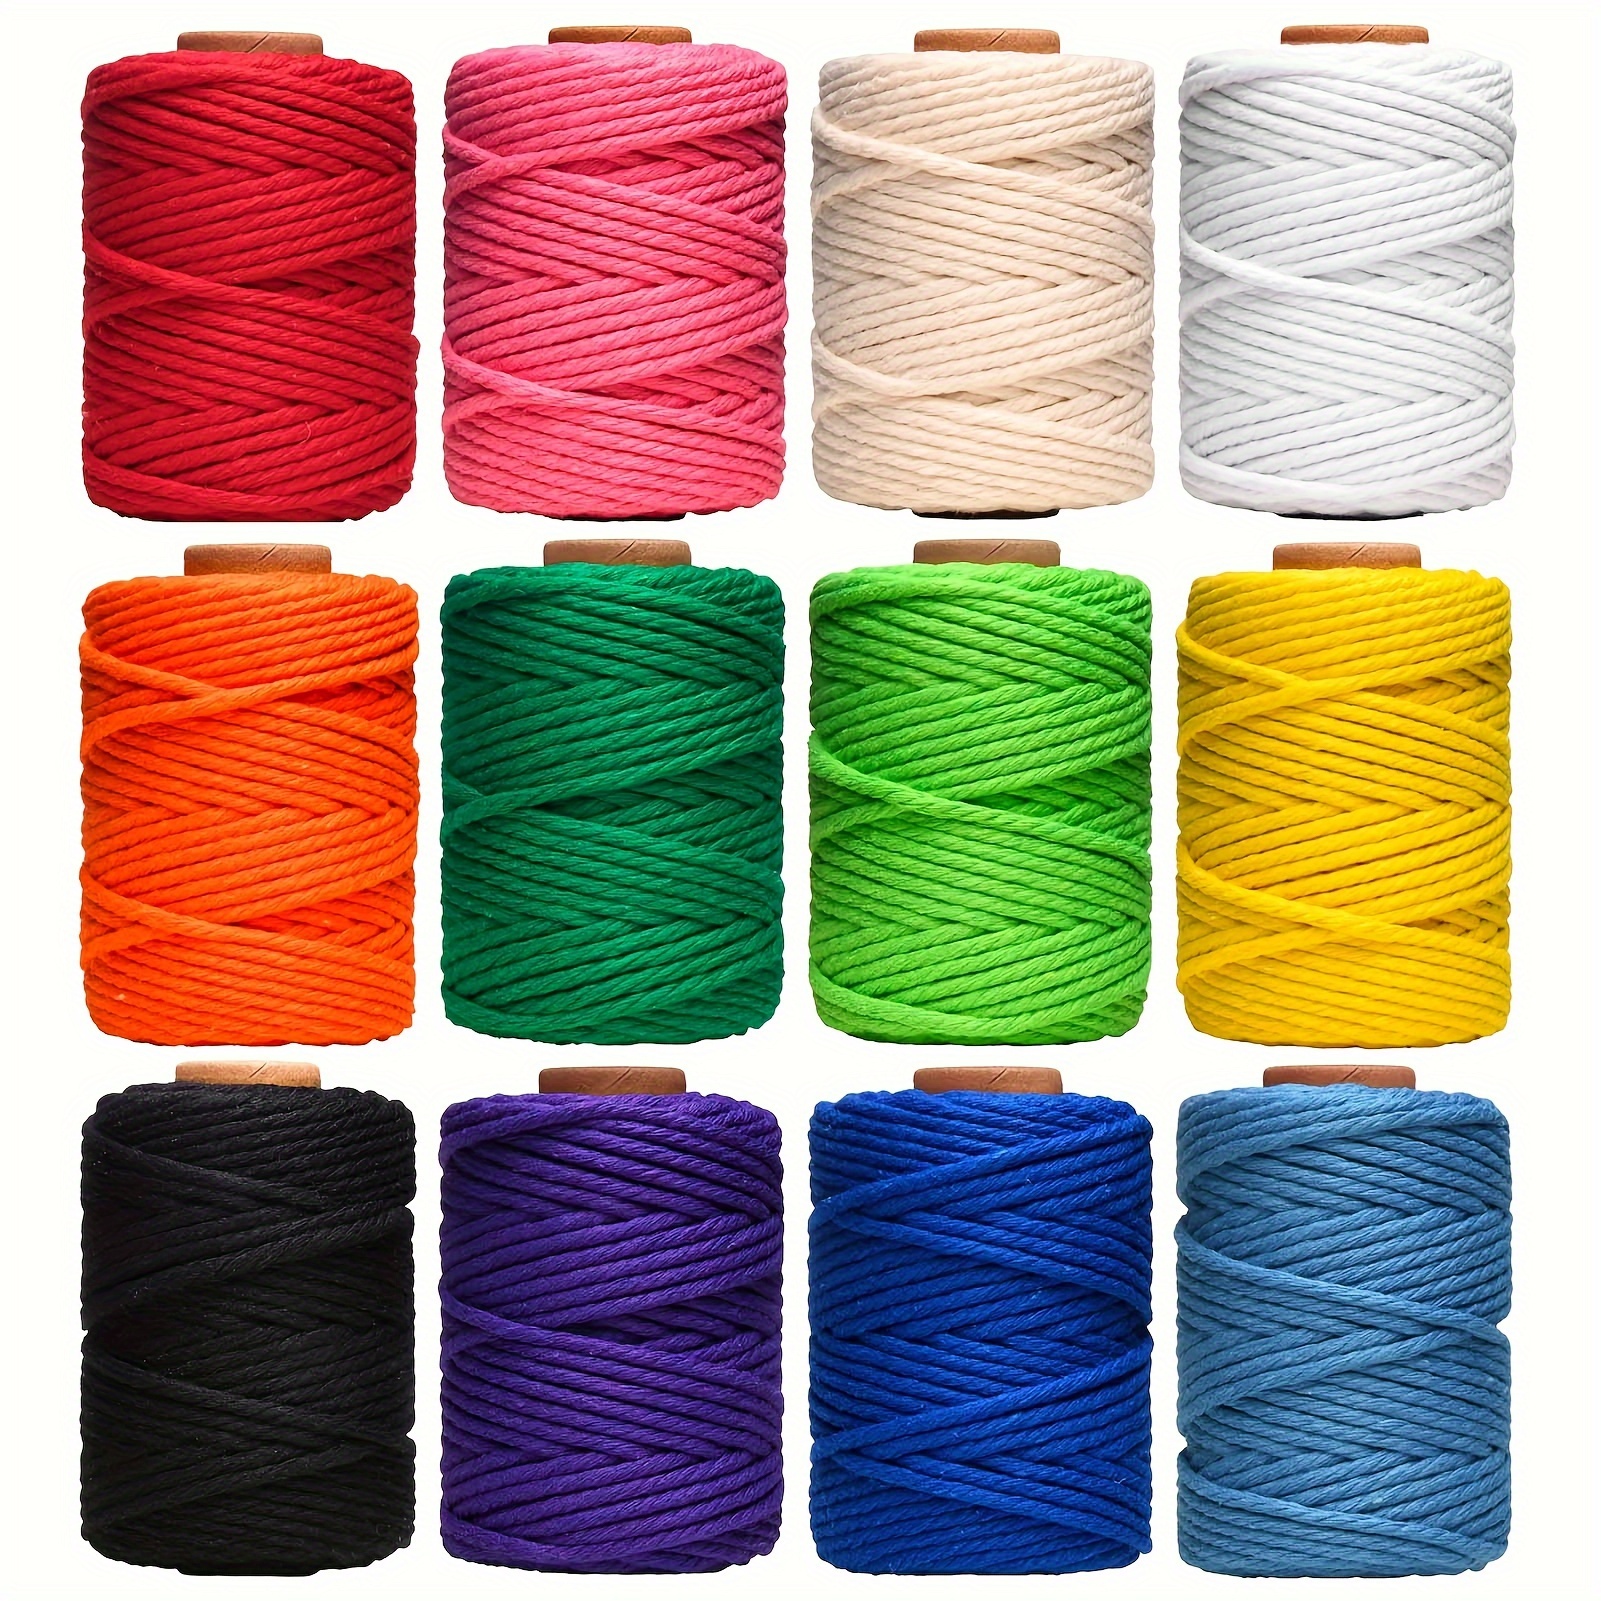 

12-piece Multicolor Cotton Macrame Cord, 3mm X 396 Yards Each - Durable 4-strand Twine For Diy Crafts, Wall Hangings, Plant Hangers & Gift Wrapping